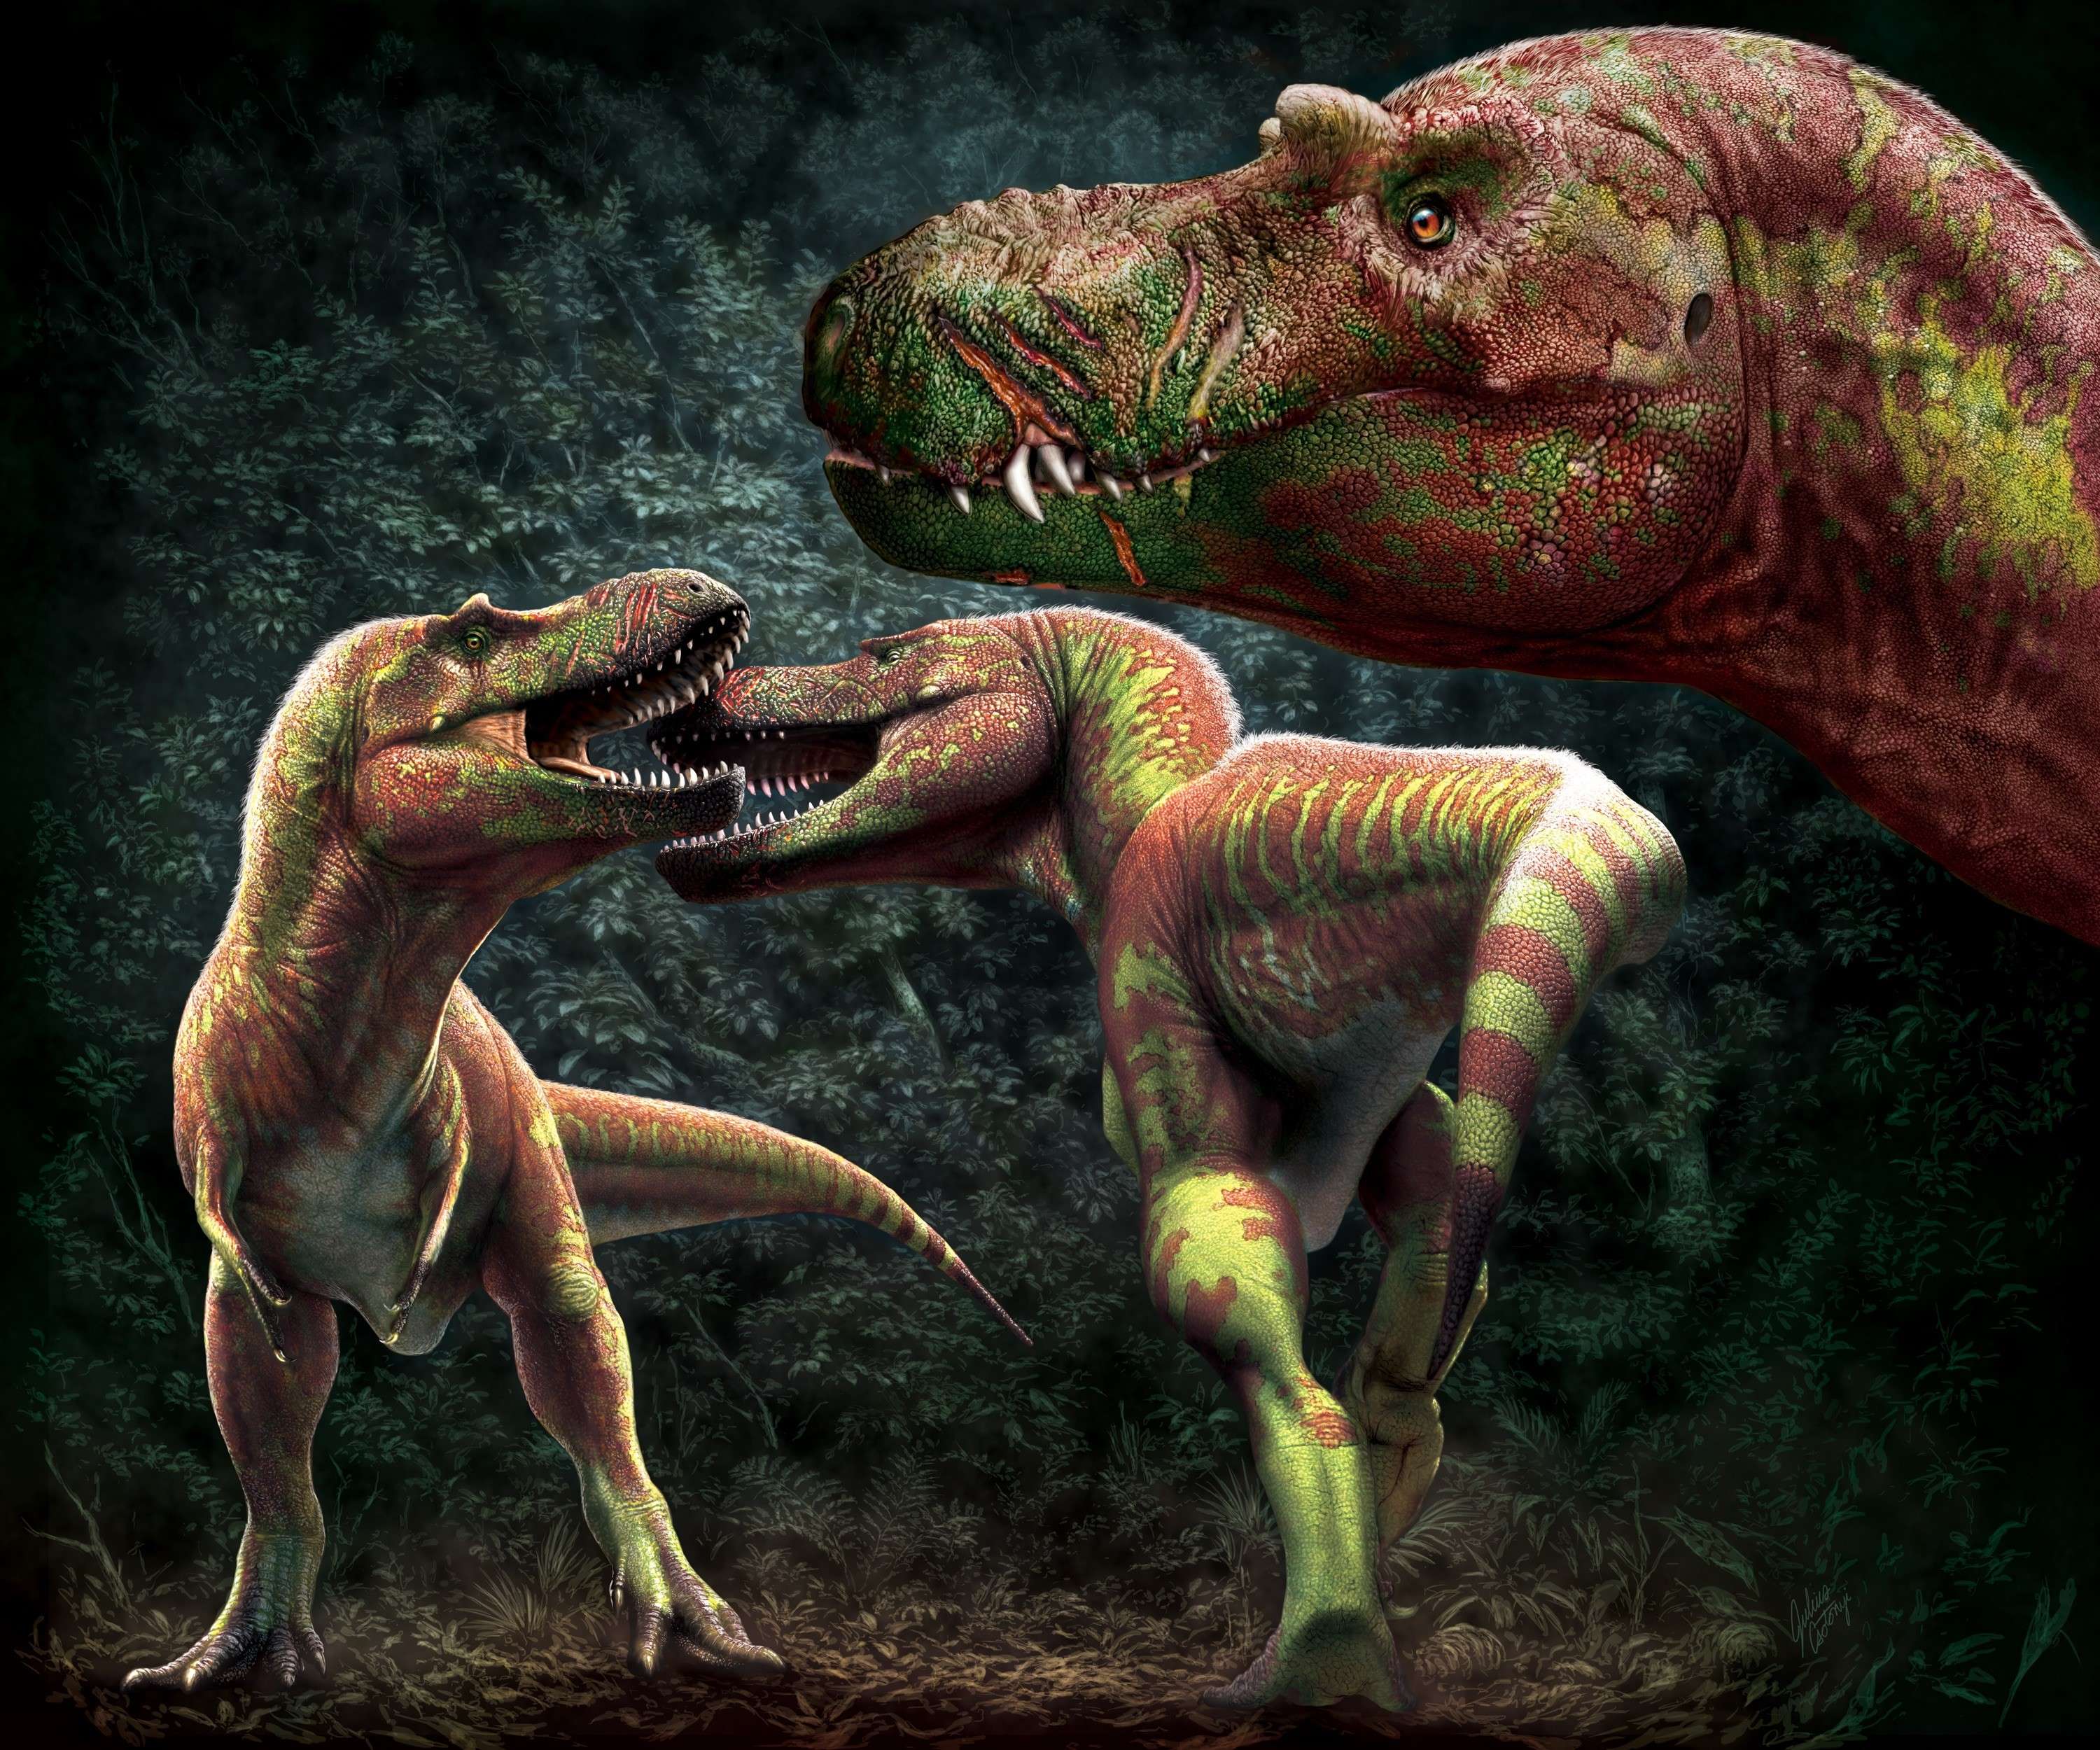 Tyrannosaurs would bite each other